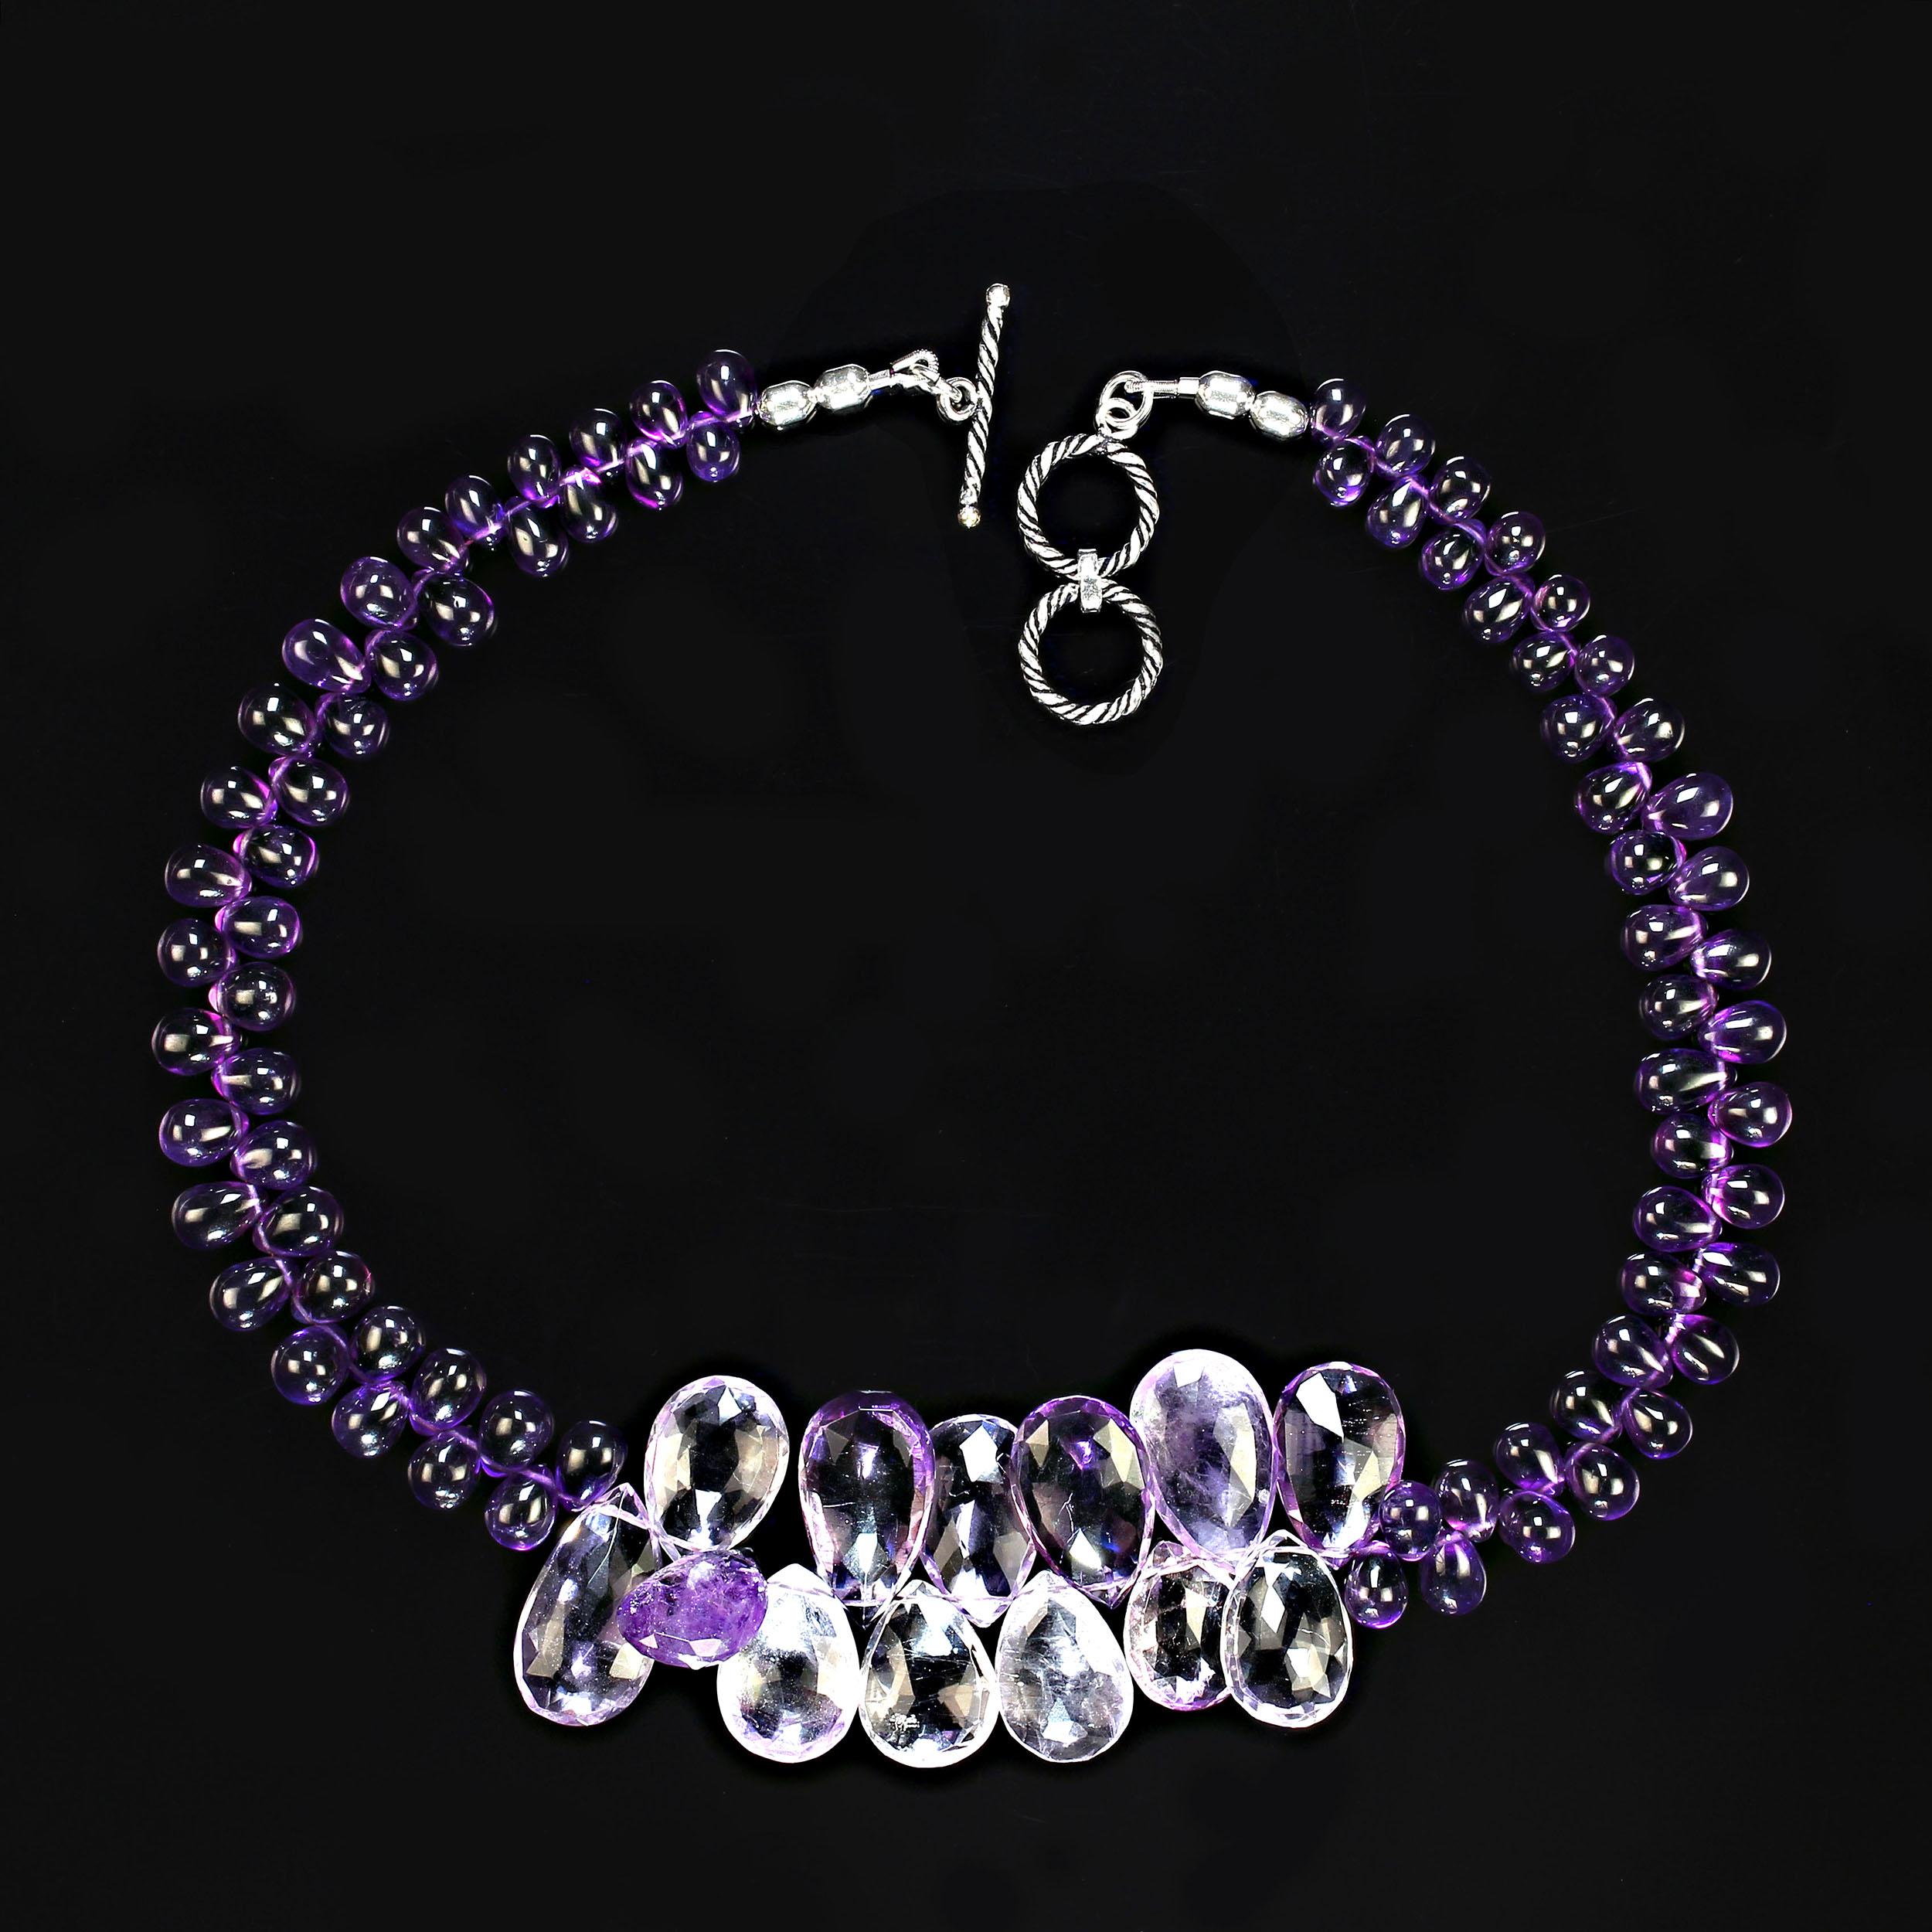 Artisan AJD Unique and Exquisite Amethyst 17 Inch necklace  Great February Gift! For Sale